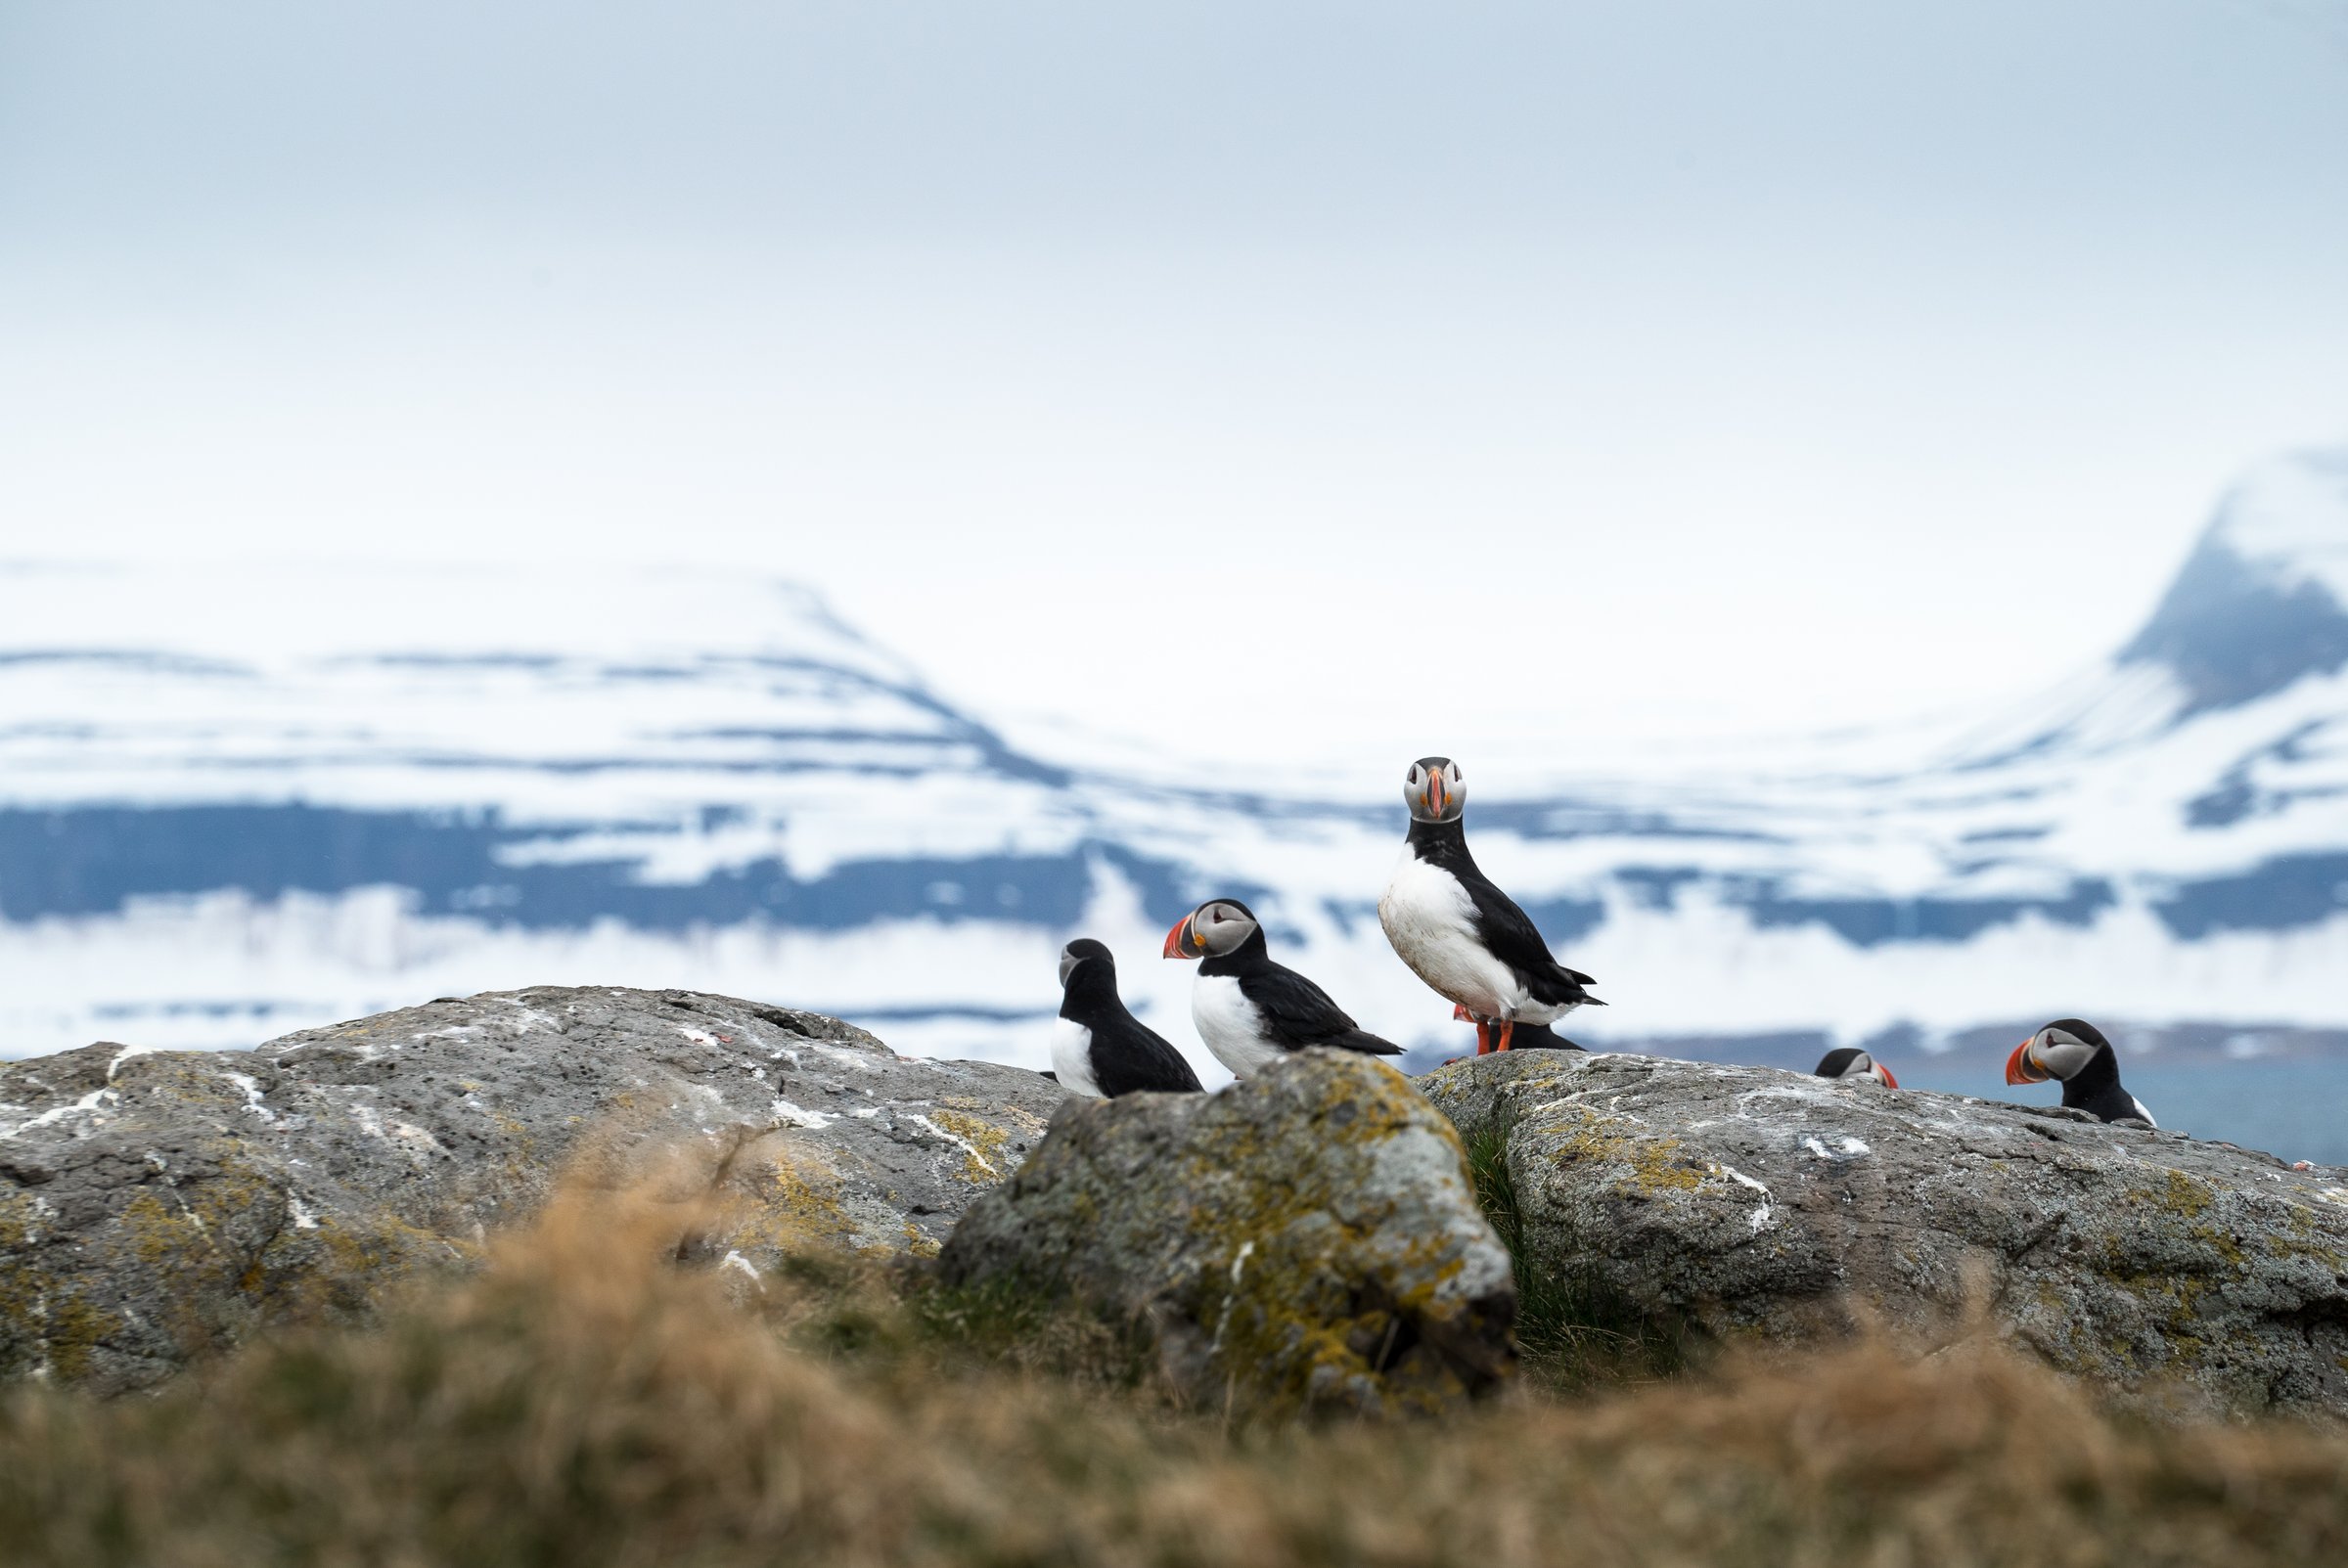 A group of puffins standing on a rock, one puffin facing the camera. In the background snow-covered mountains.